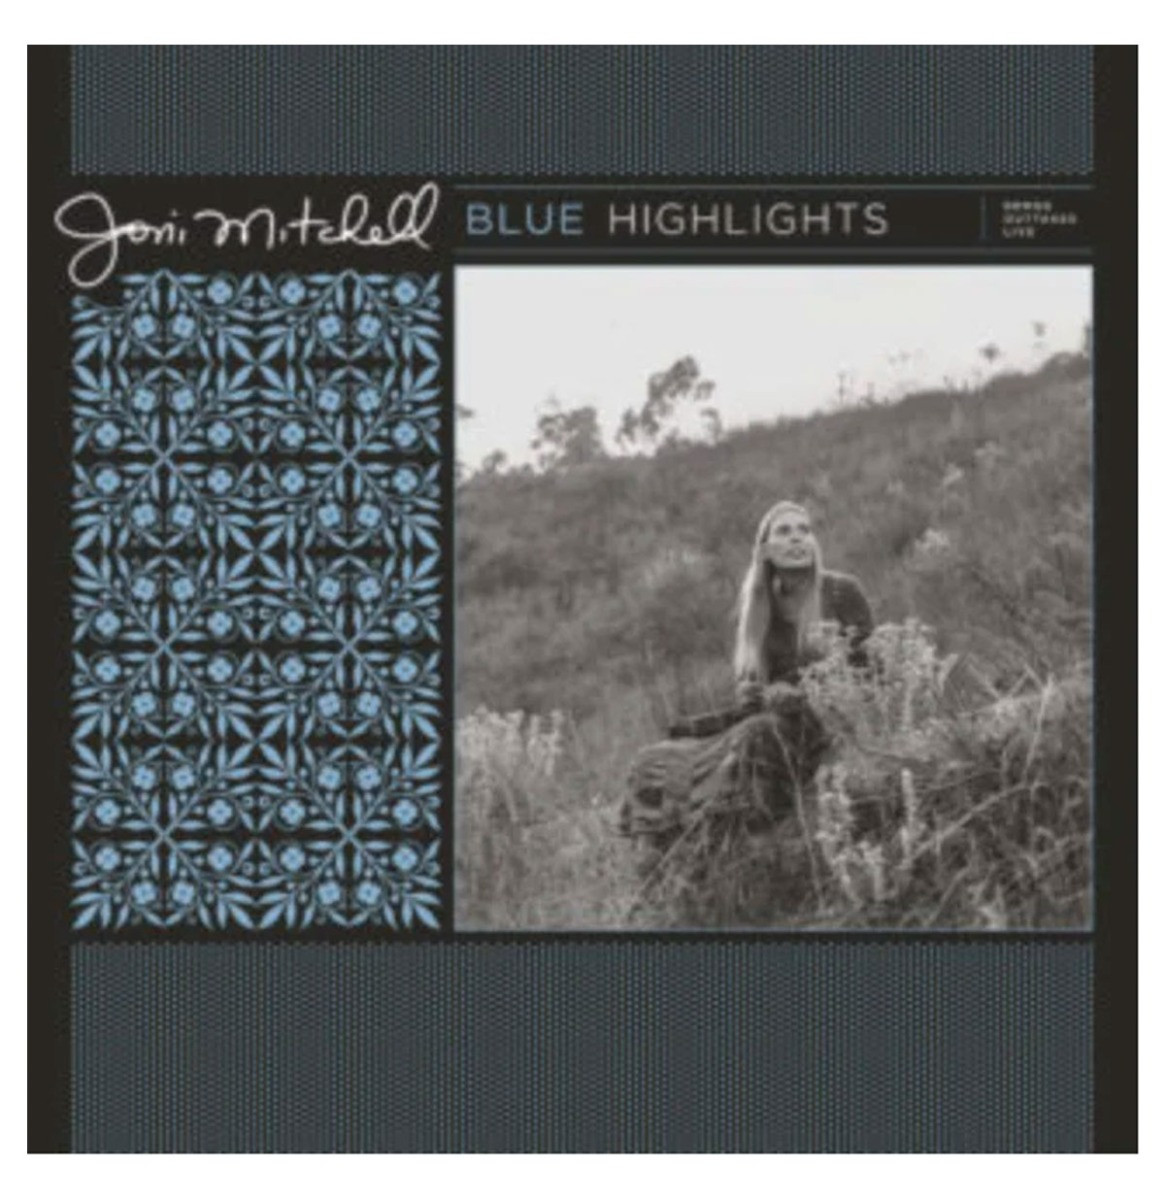 Joni Mitchell - Blue 50 Highlights: Demos, Outtakes & Live Tracks (Record Store Day 2022)